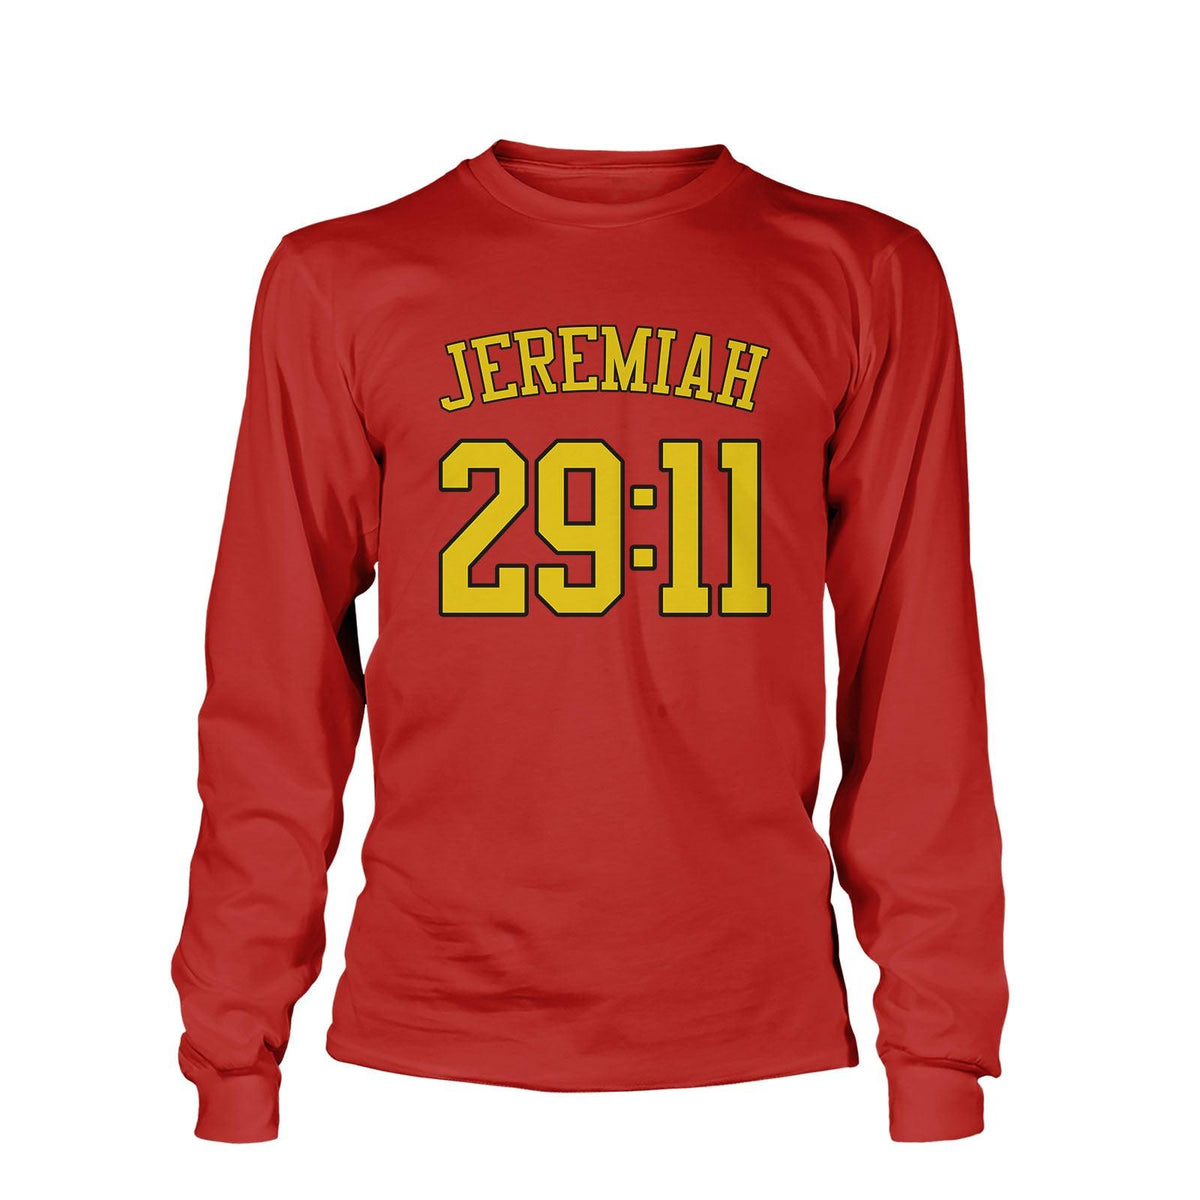 Jeremiah 29:11 Football Long-Sleeves - Our True God